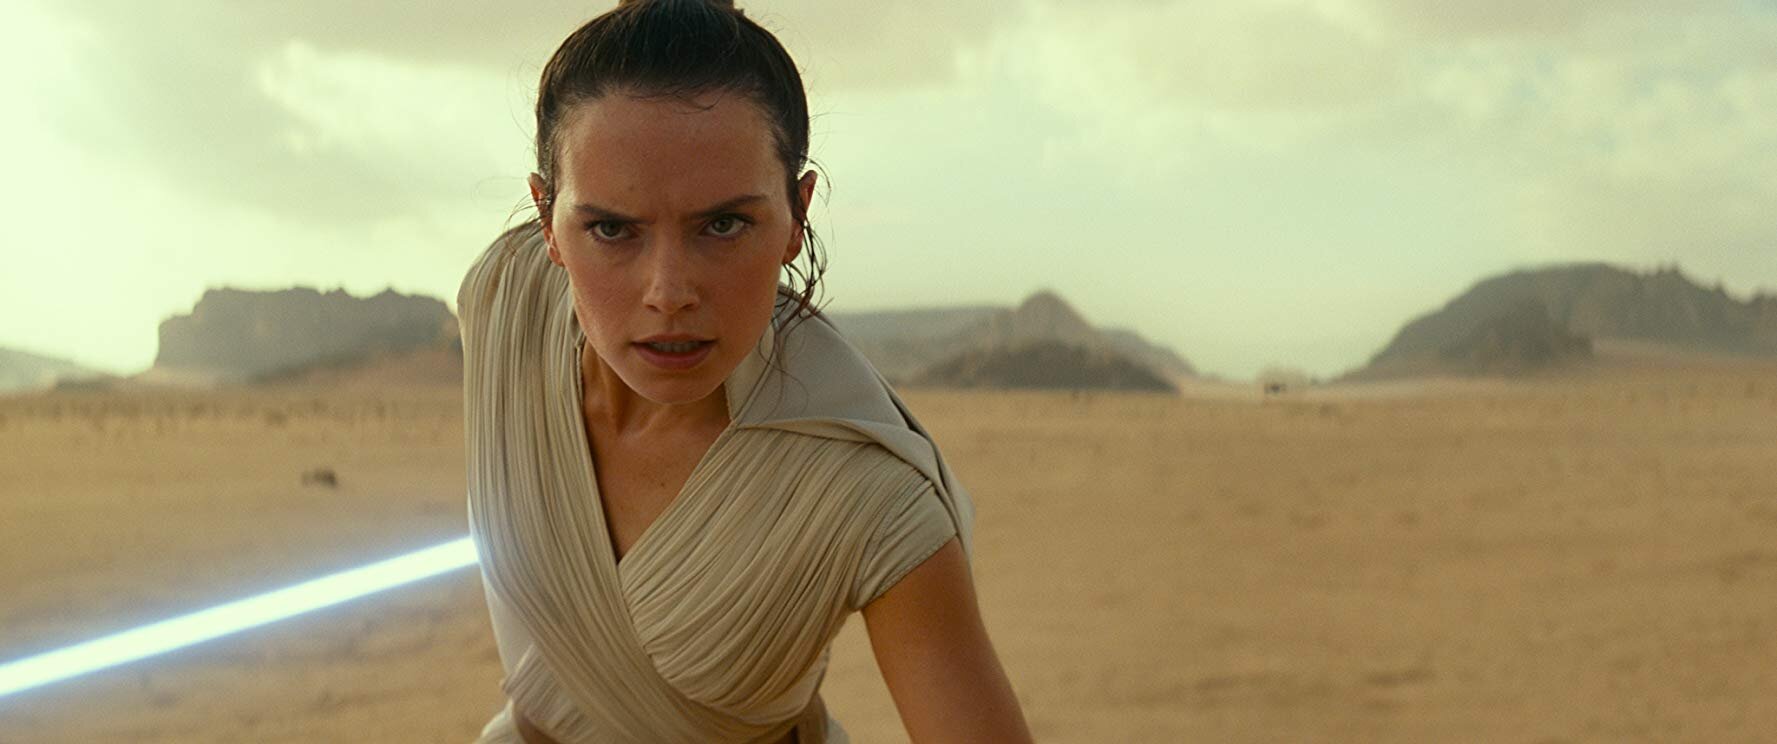 Star Wars: The Rise of Skywalker review: A galaxy far, far away recycles